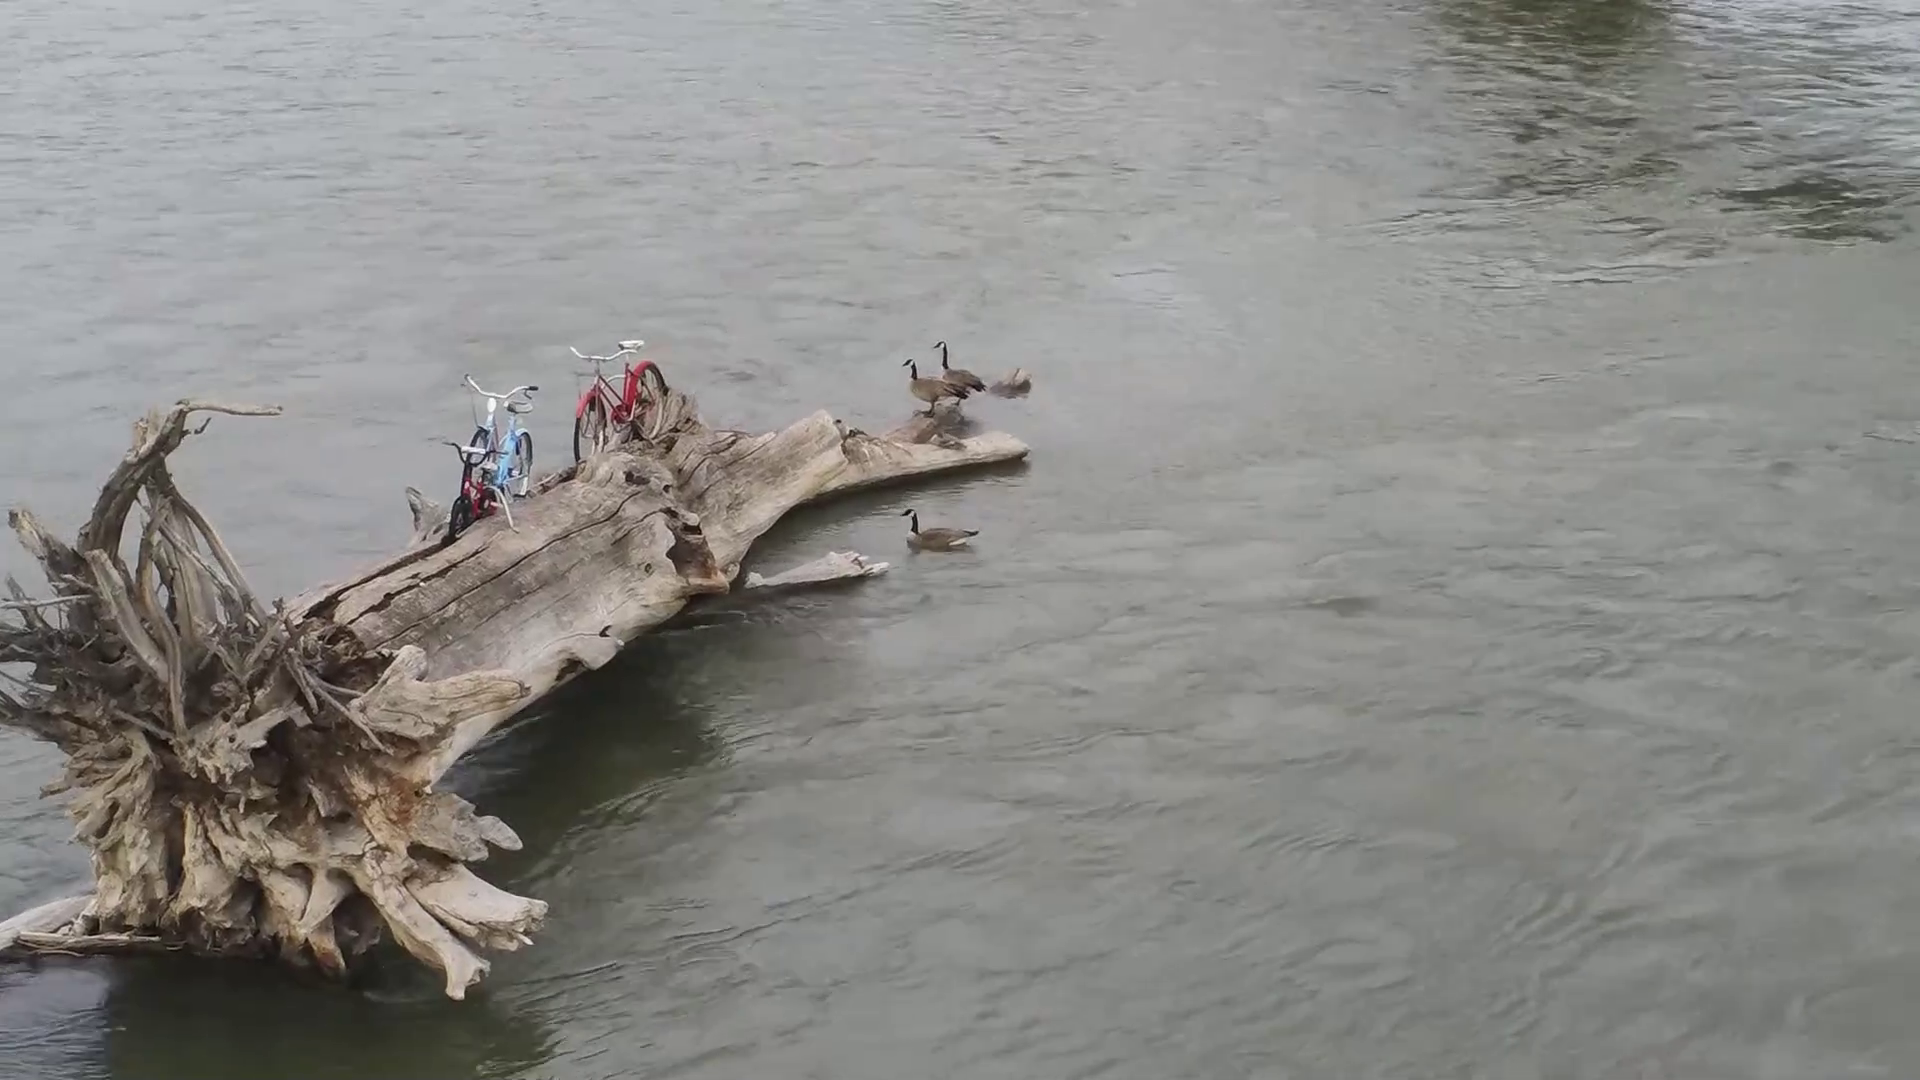 Bikes On A Log In The River